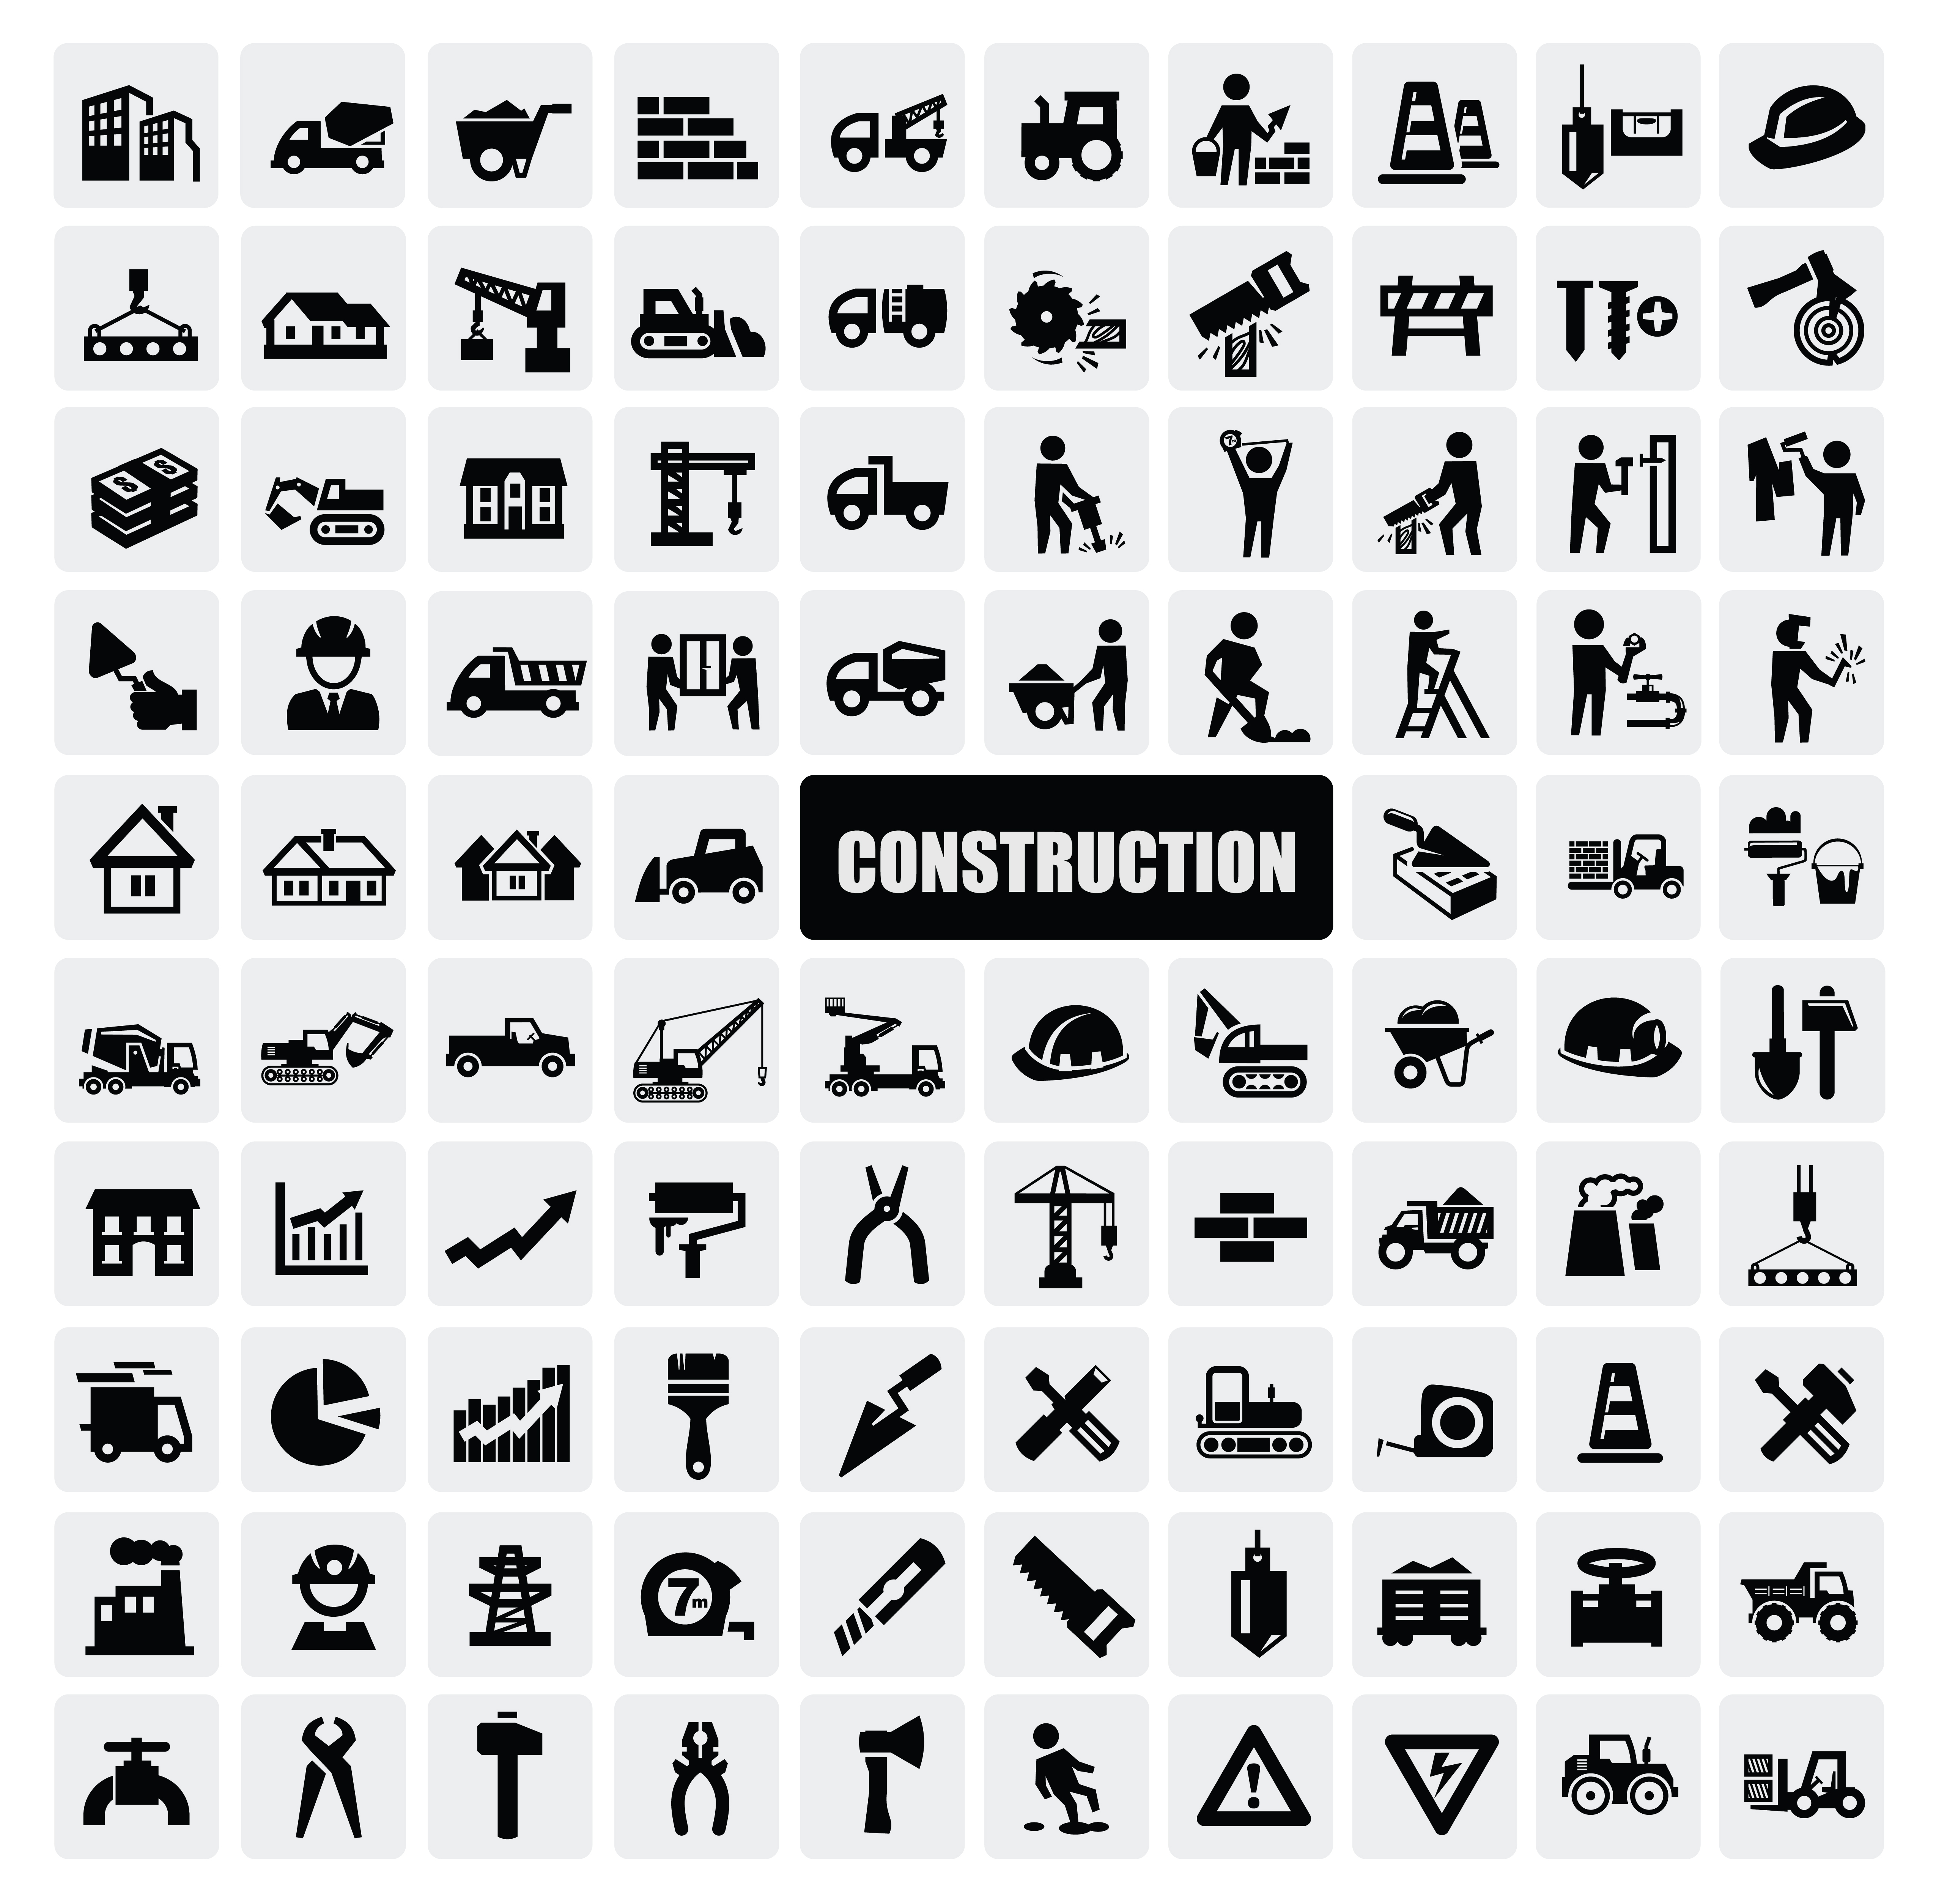 92 Construction Terms Everyone Should Understand 